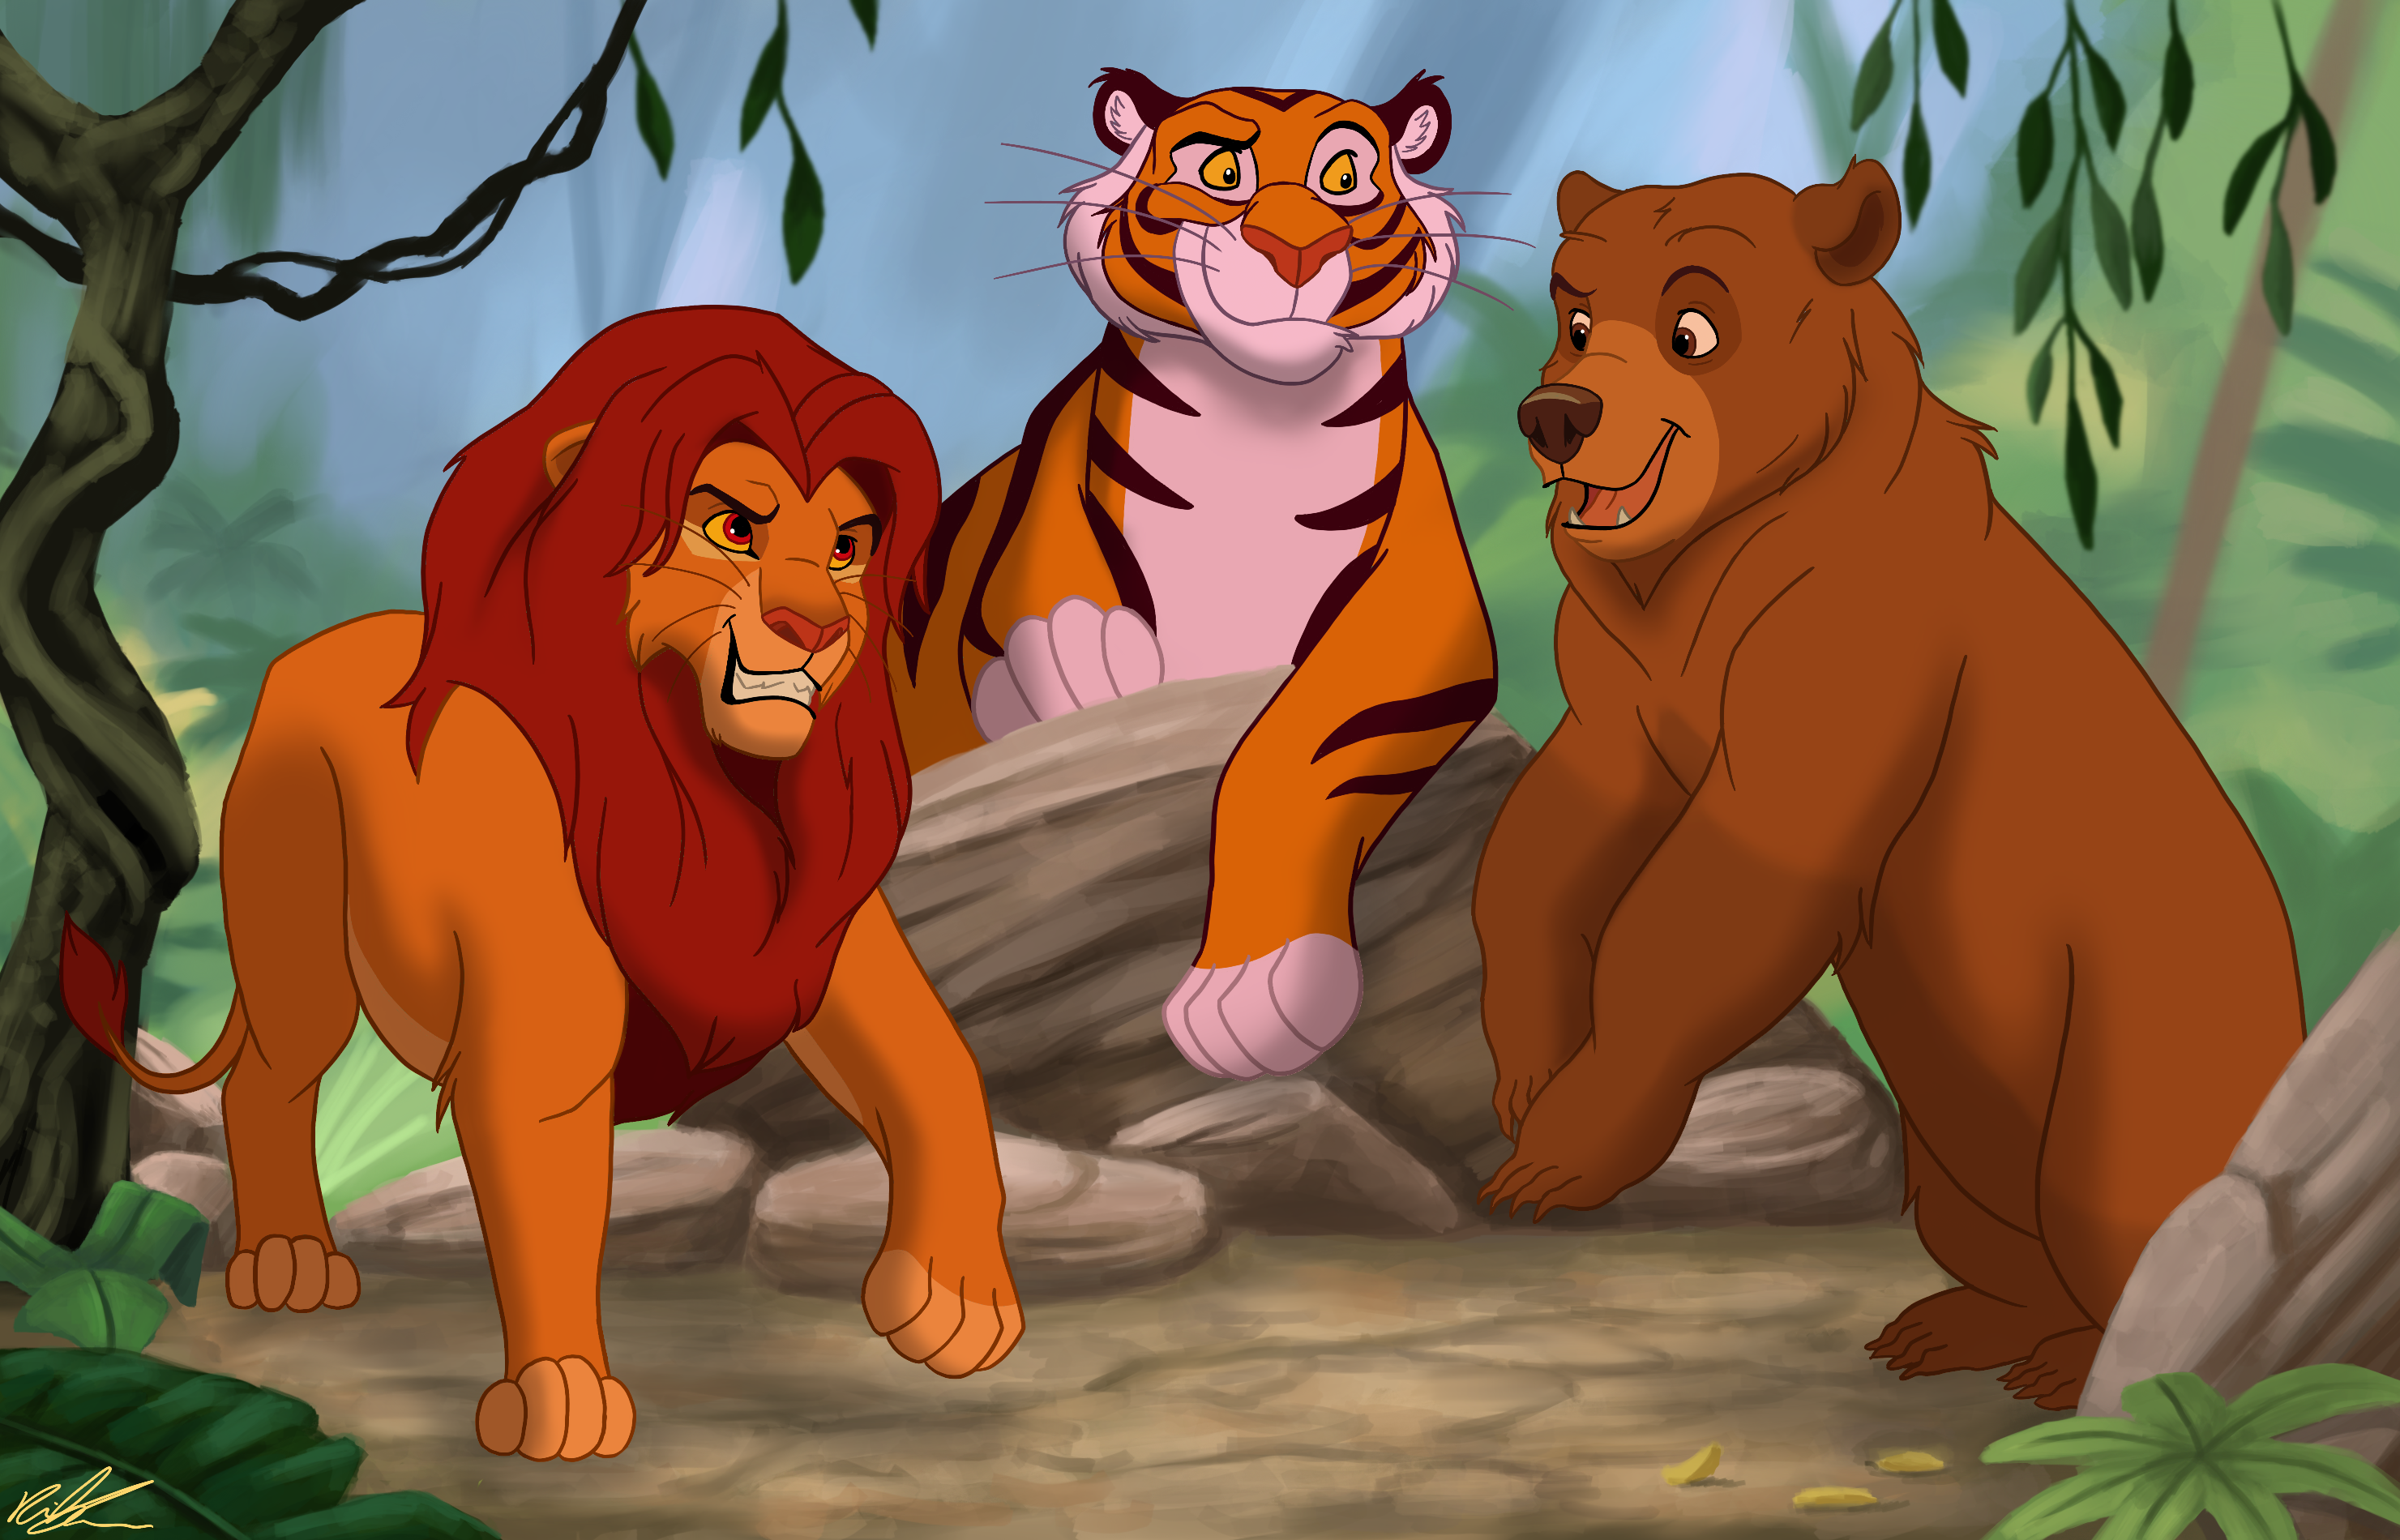 Lions, Tigers, and Bears by SnowingRoses on DeviantArt